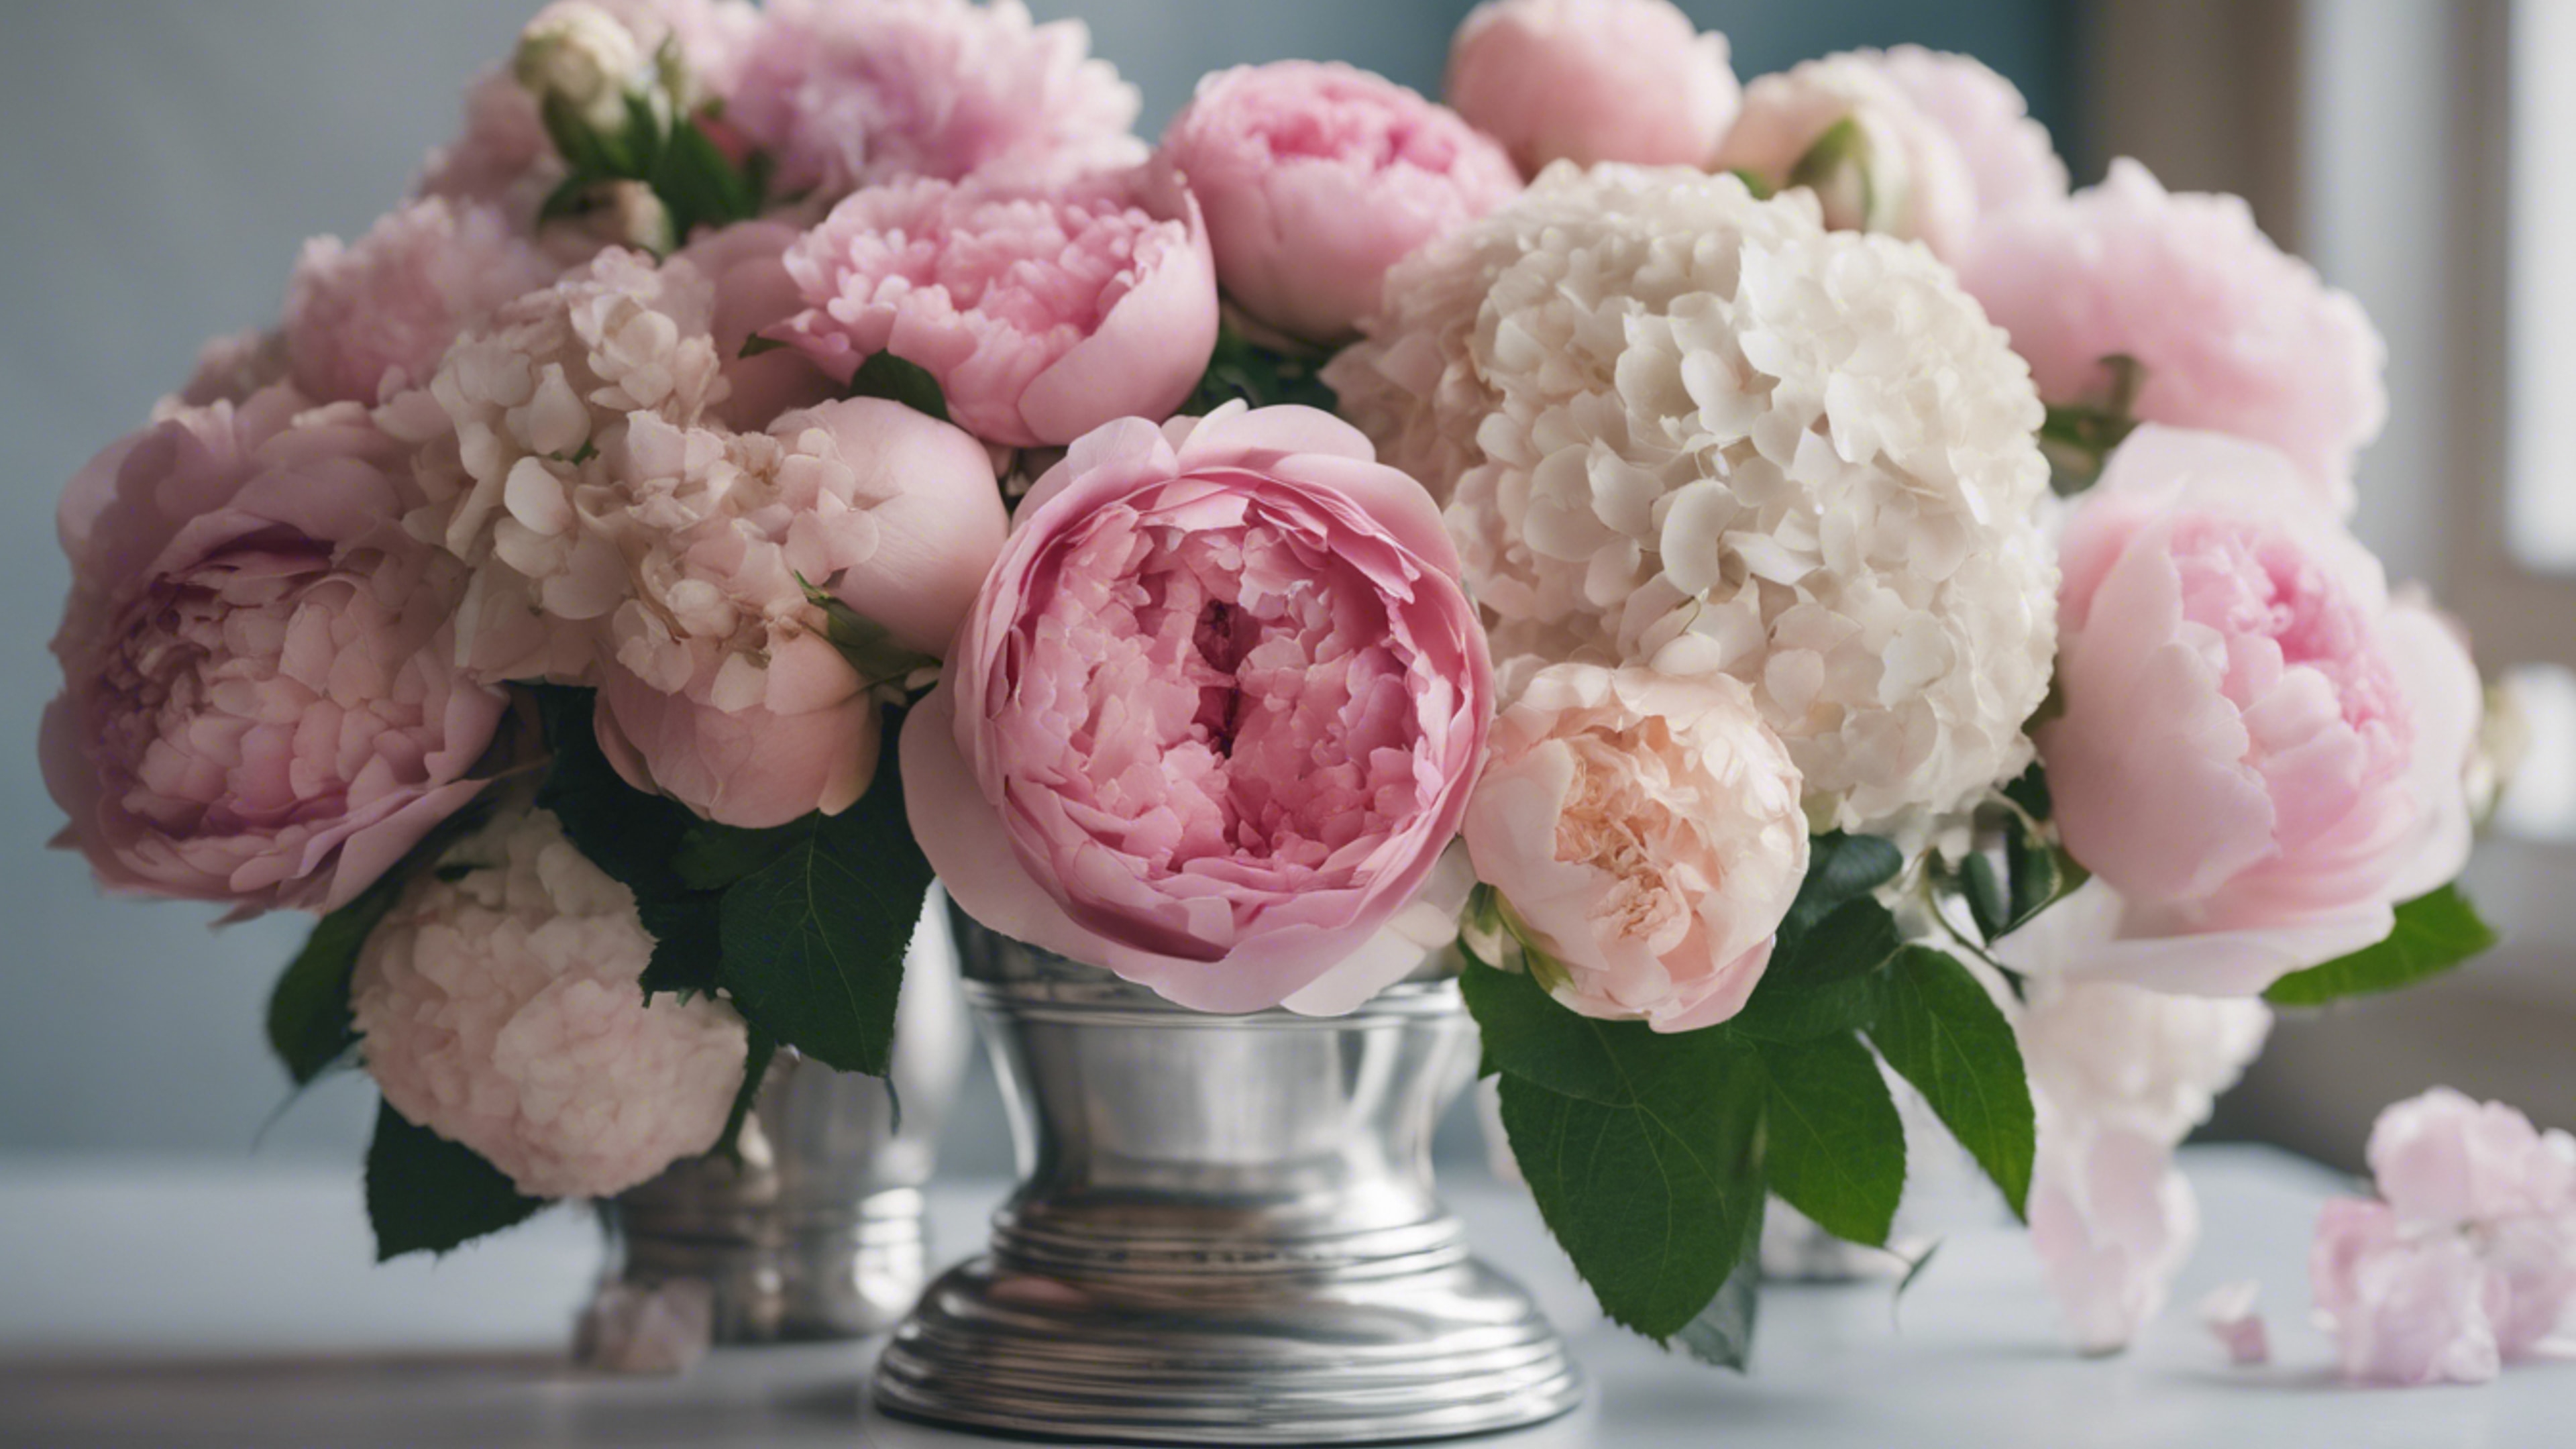 An arrangement of pink roses, peonies, and hydrangeas in a silver vase, embodying preppy elegance. Валлпапер[810d260cf91945bd97fc]